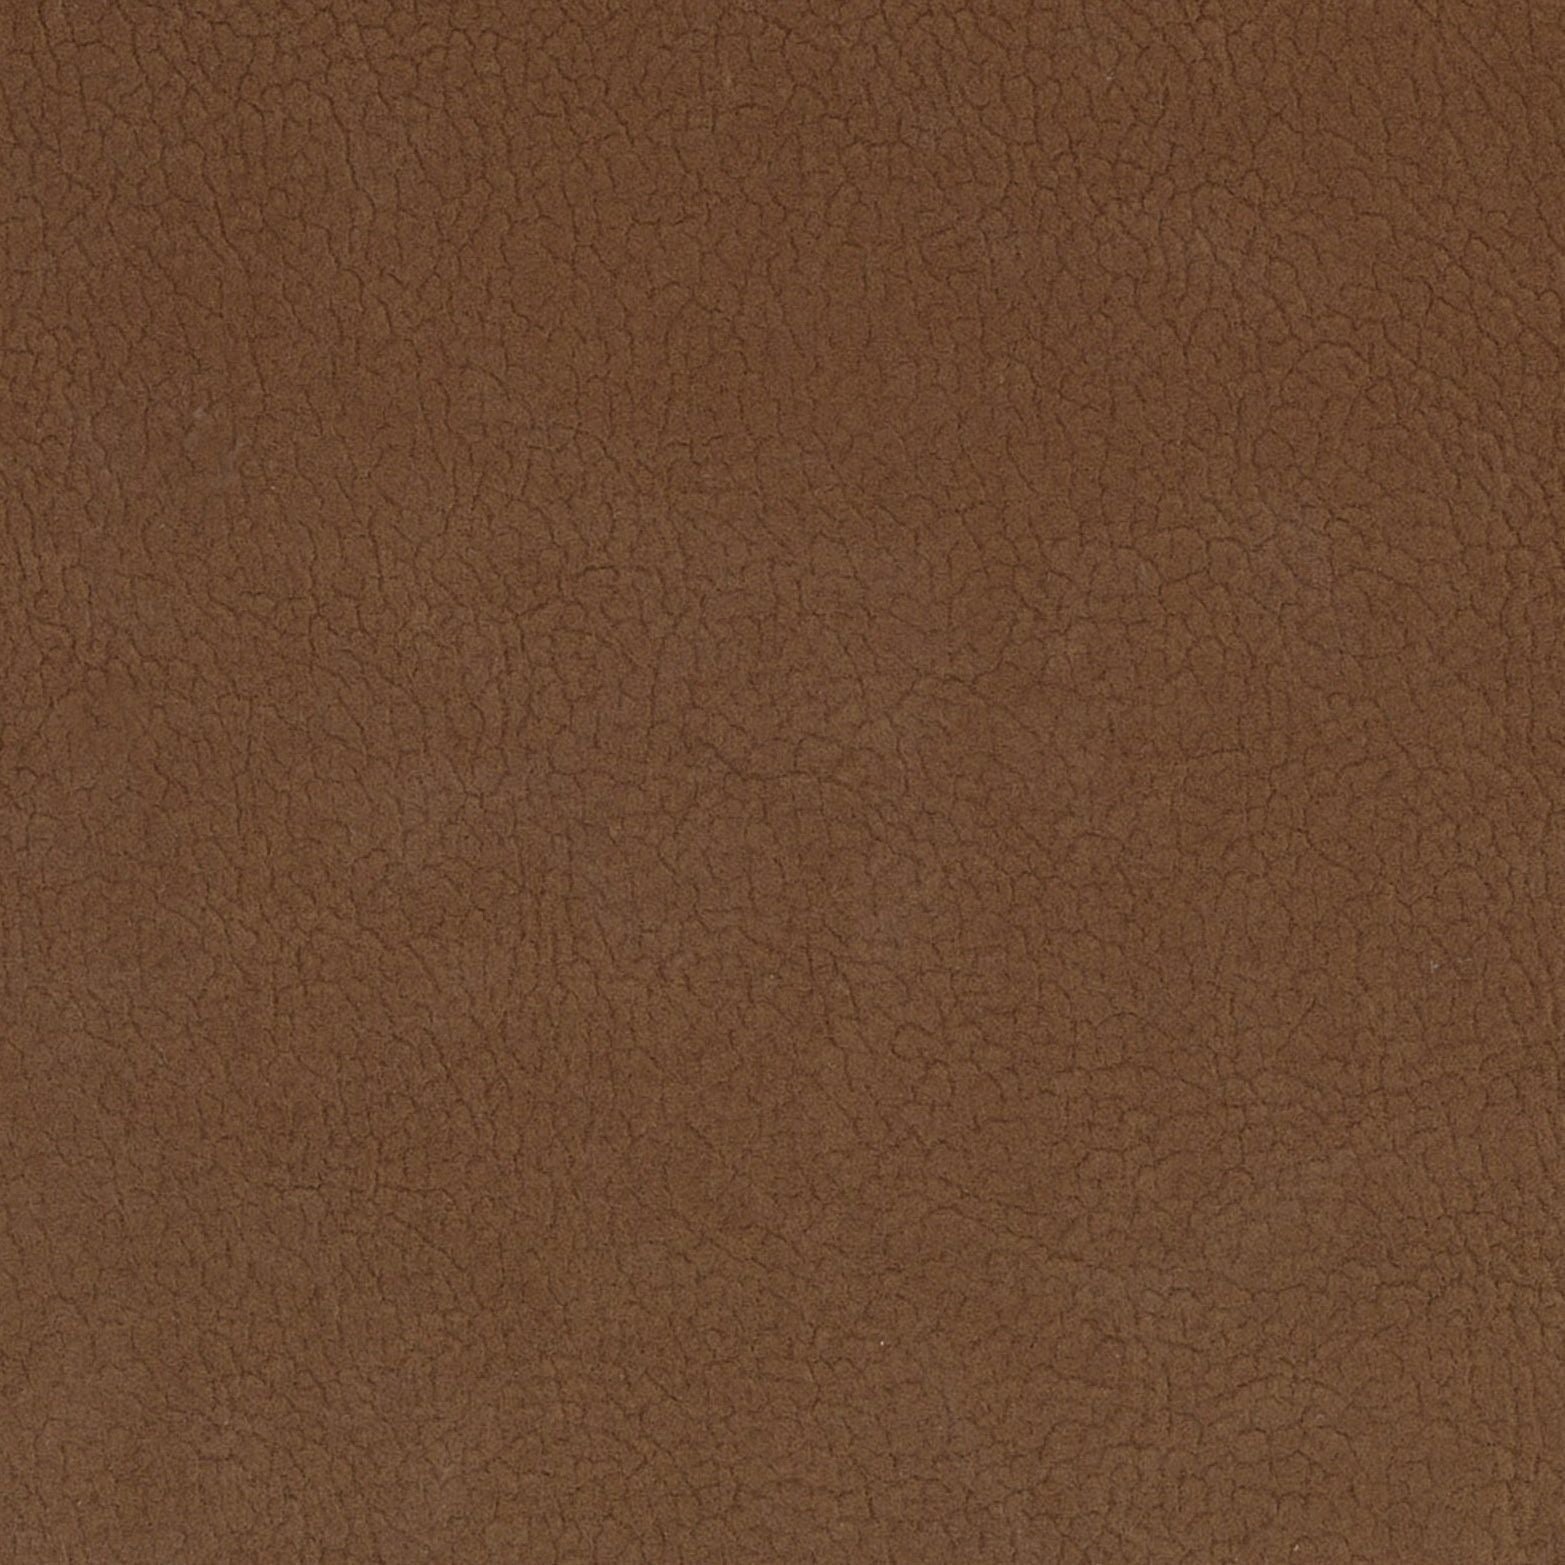 Georgia Suede fabric in caribou color - pattern number H6 37495937 - by Scalamandre in the Old World Weavers collection